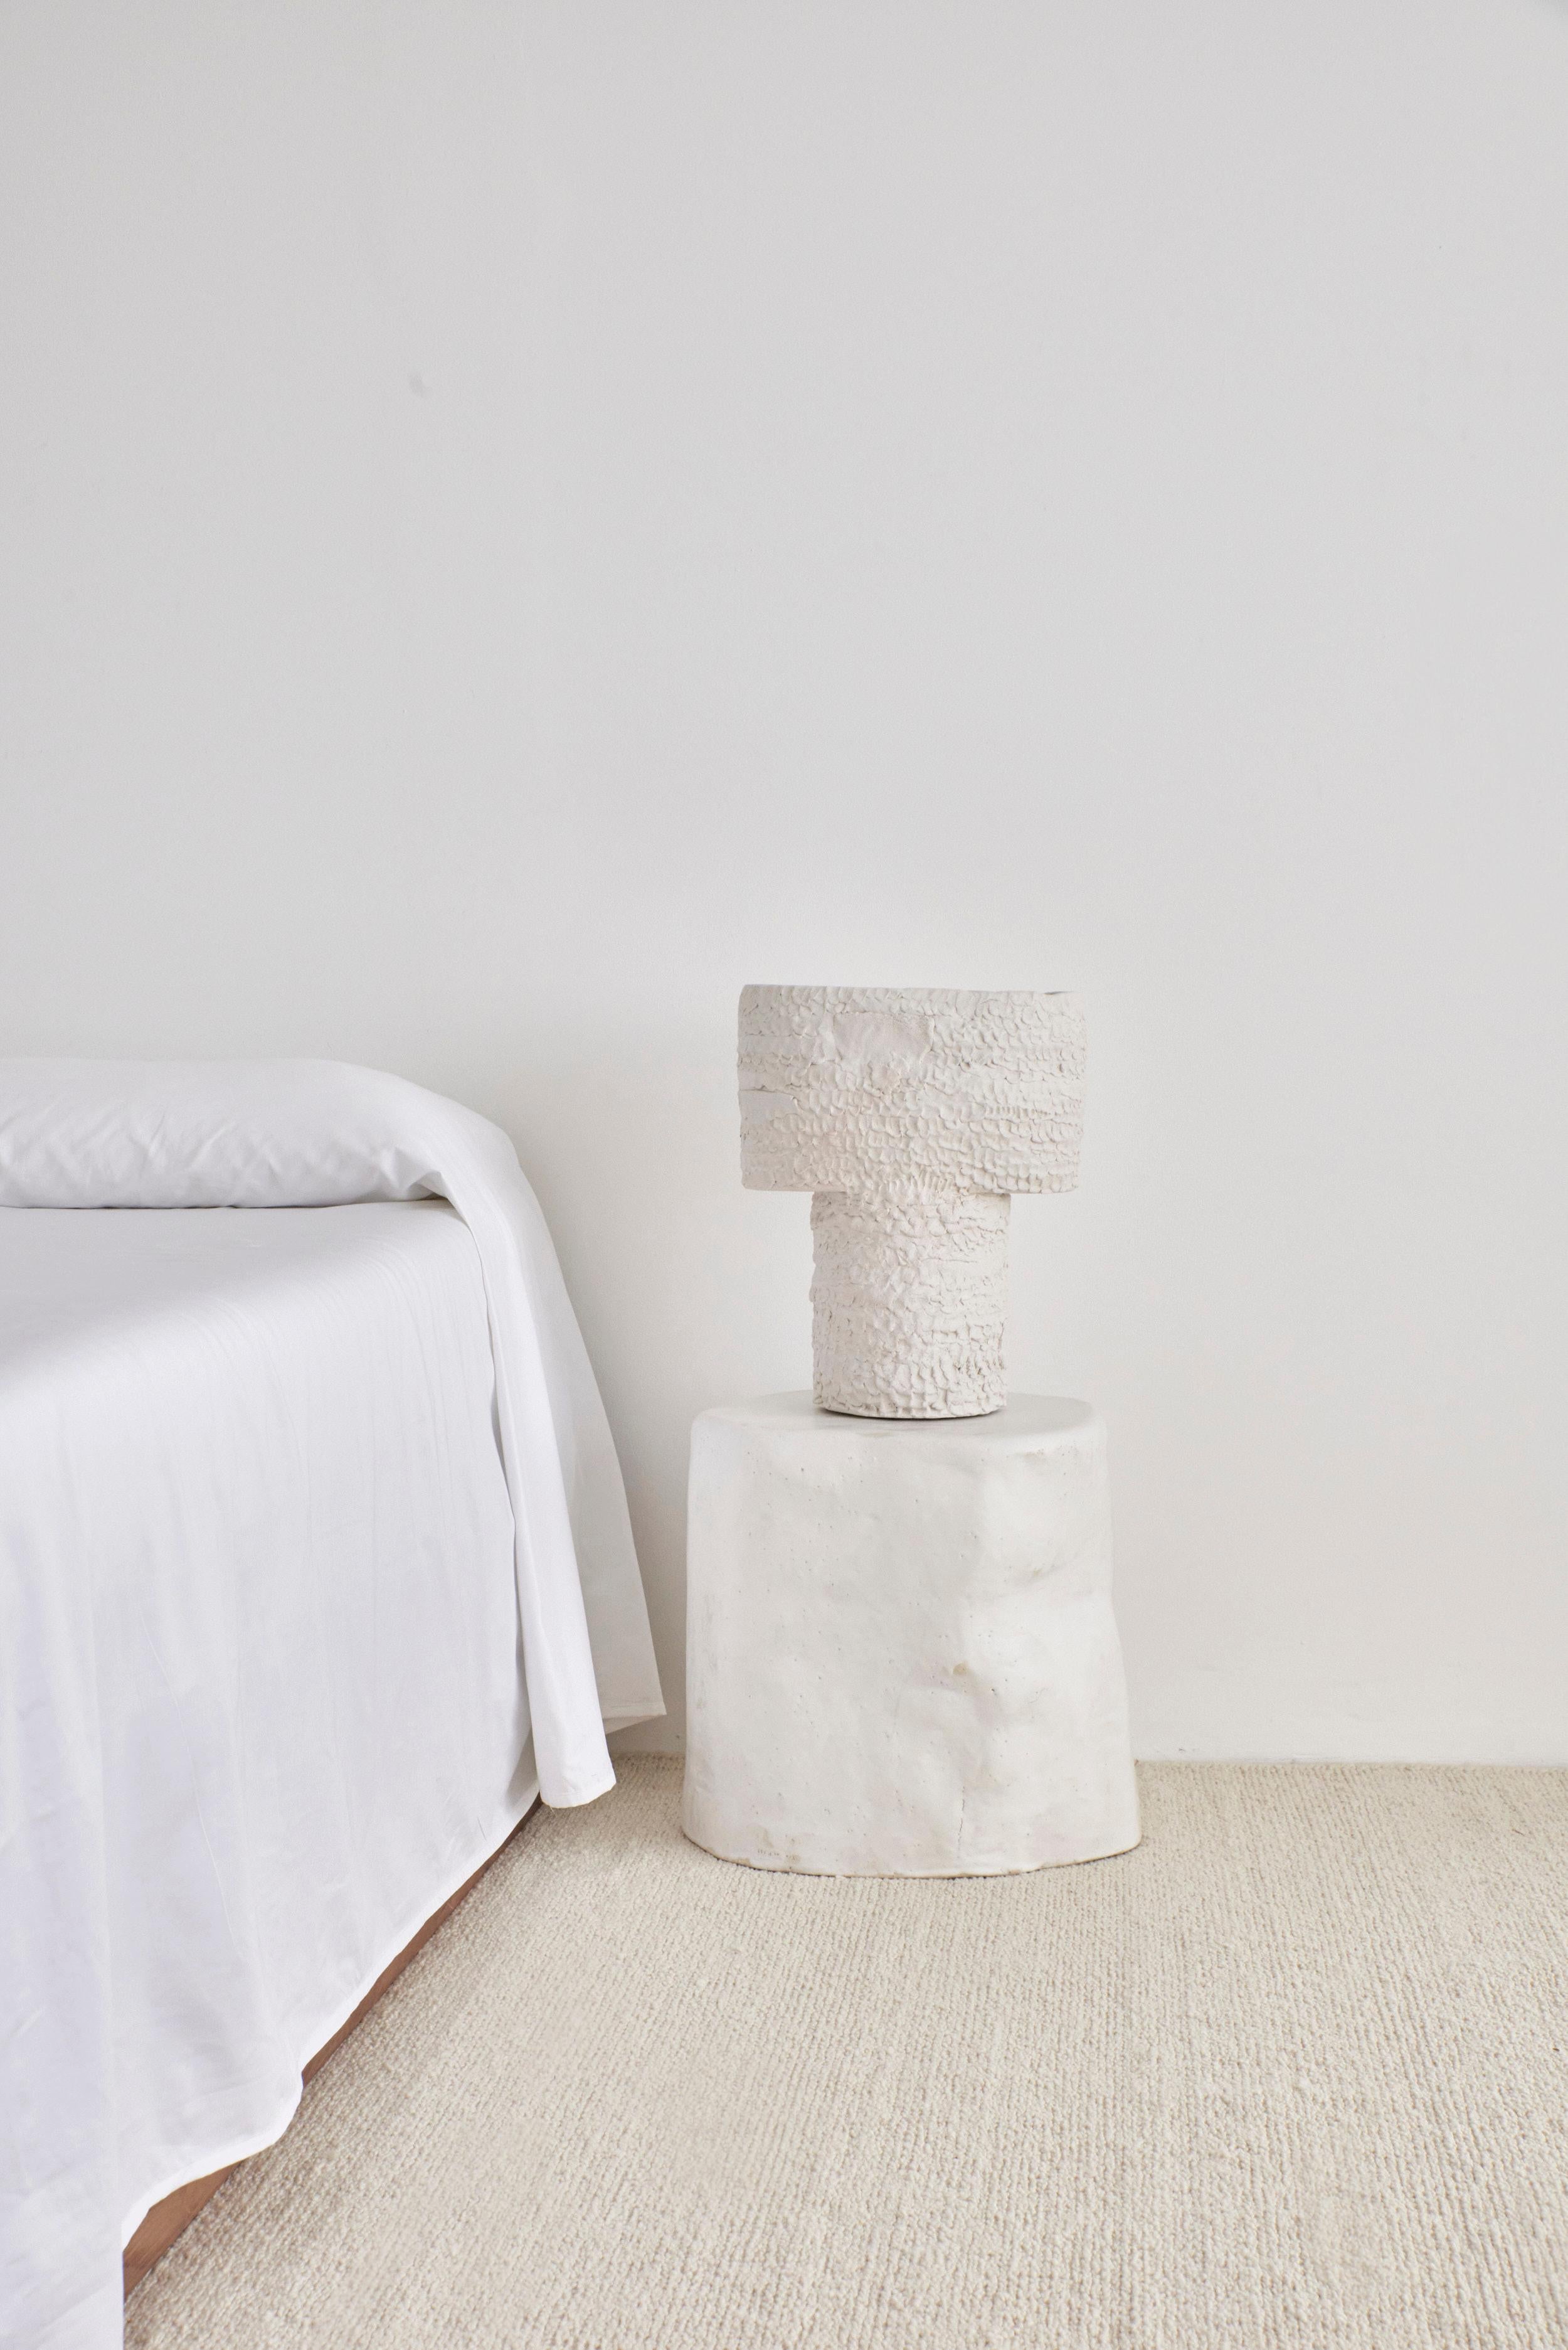 Casa Table Light Medium in white
Designed by Project 213A in 2023

Artisanal ceramic light with textured finish, made in Project 213A's own ceramic workshop.
Each piece is unique due to its handmade nature, shapes and shades vary slightly.

Bespoke